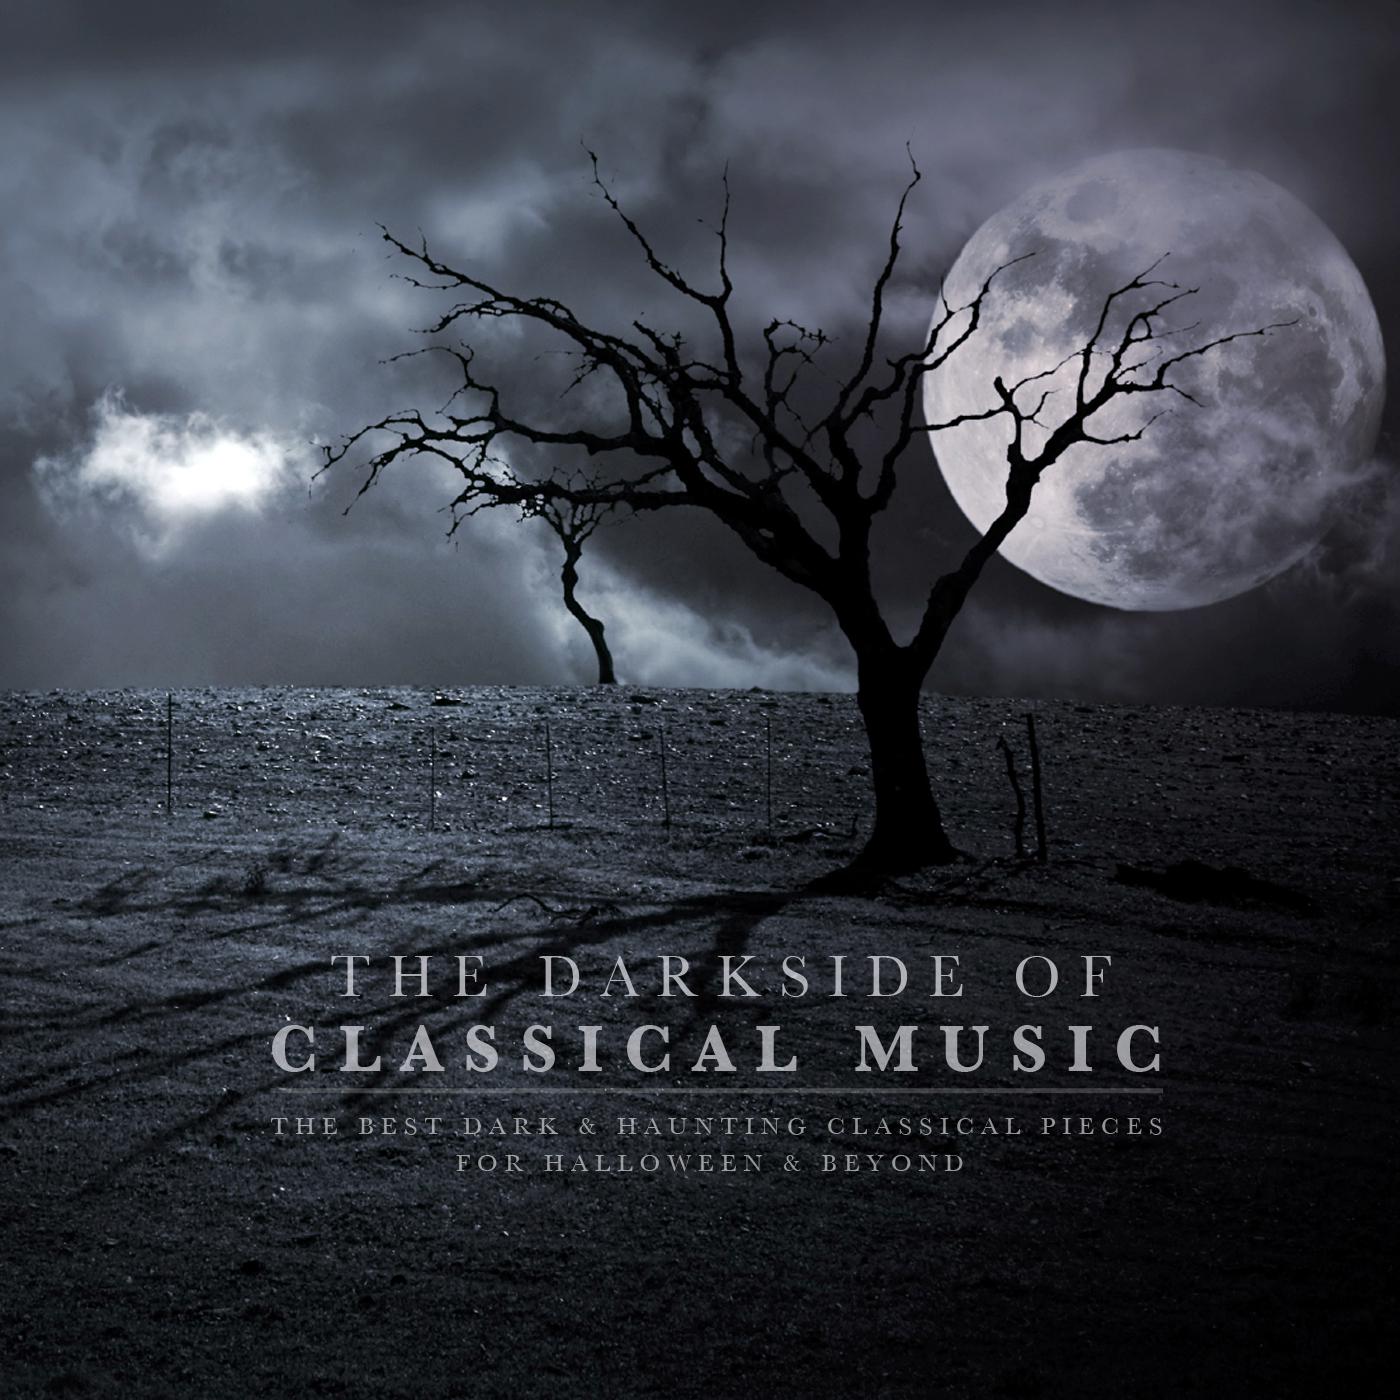 The Darkside of Classical Music: The Best Dark & Haunting Classical Pieces for Halloween & Beyond